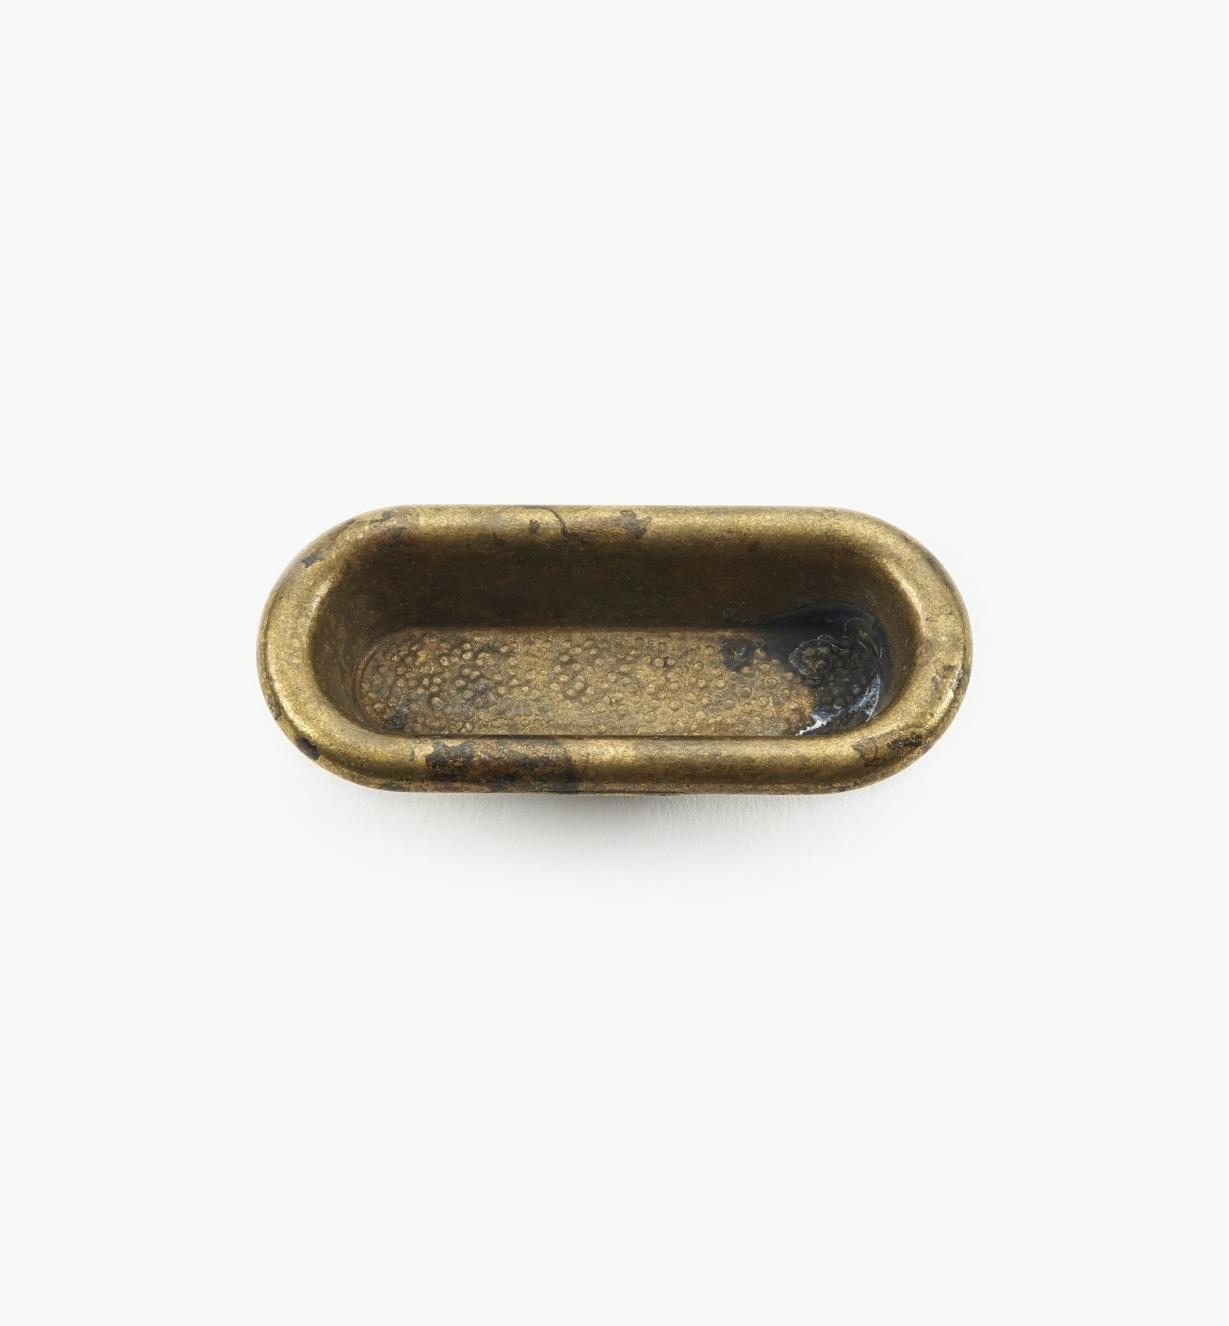 00A9260 - 60mm x 26mm Old Brass Cup Pull